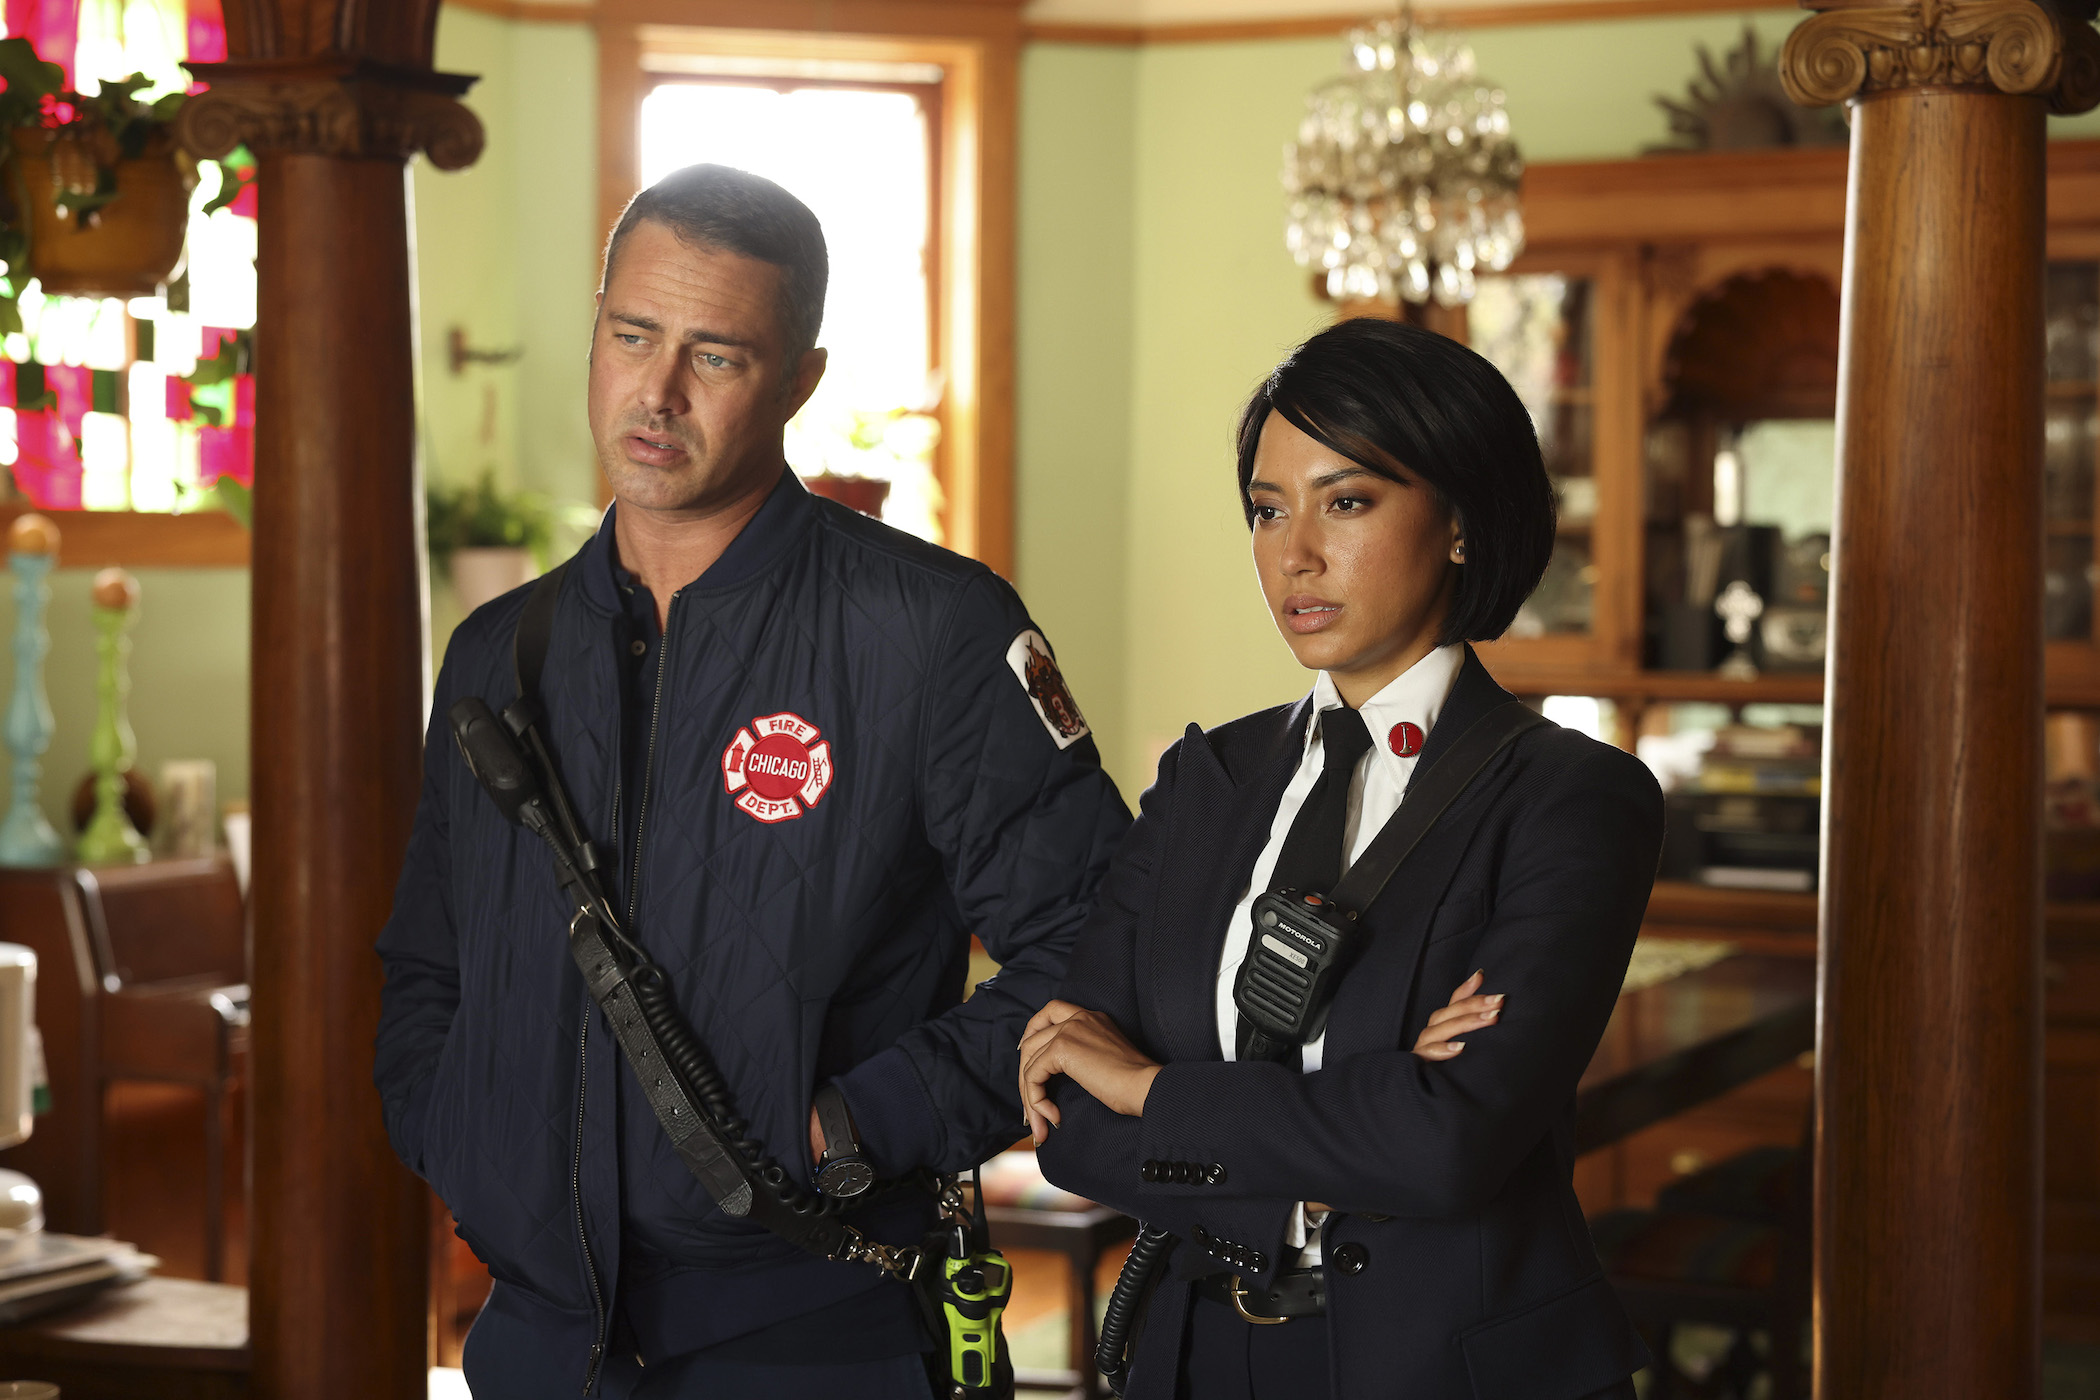 Taylor Kinney as Kelly Severide and Andy Allo as Wendy Seager standing together in 'Chicago Fire' Season 10